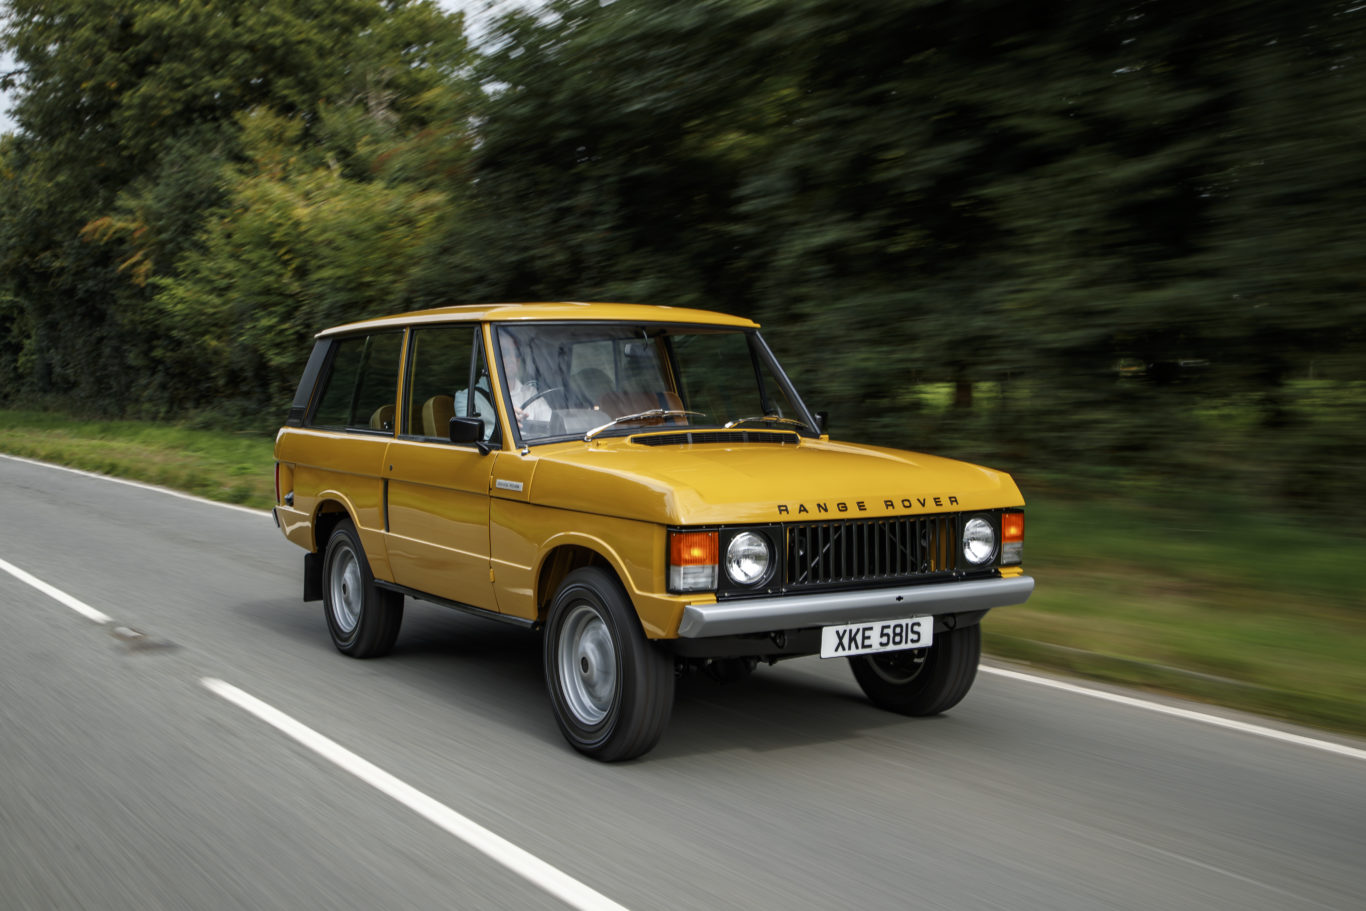 The Range Rover was the first go-anywhere luxury vehicle